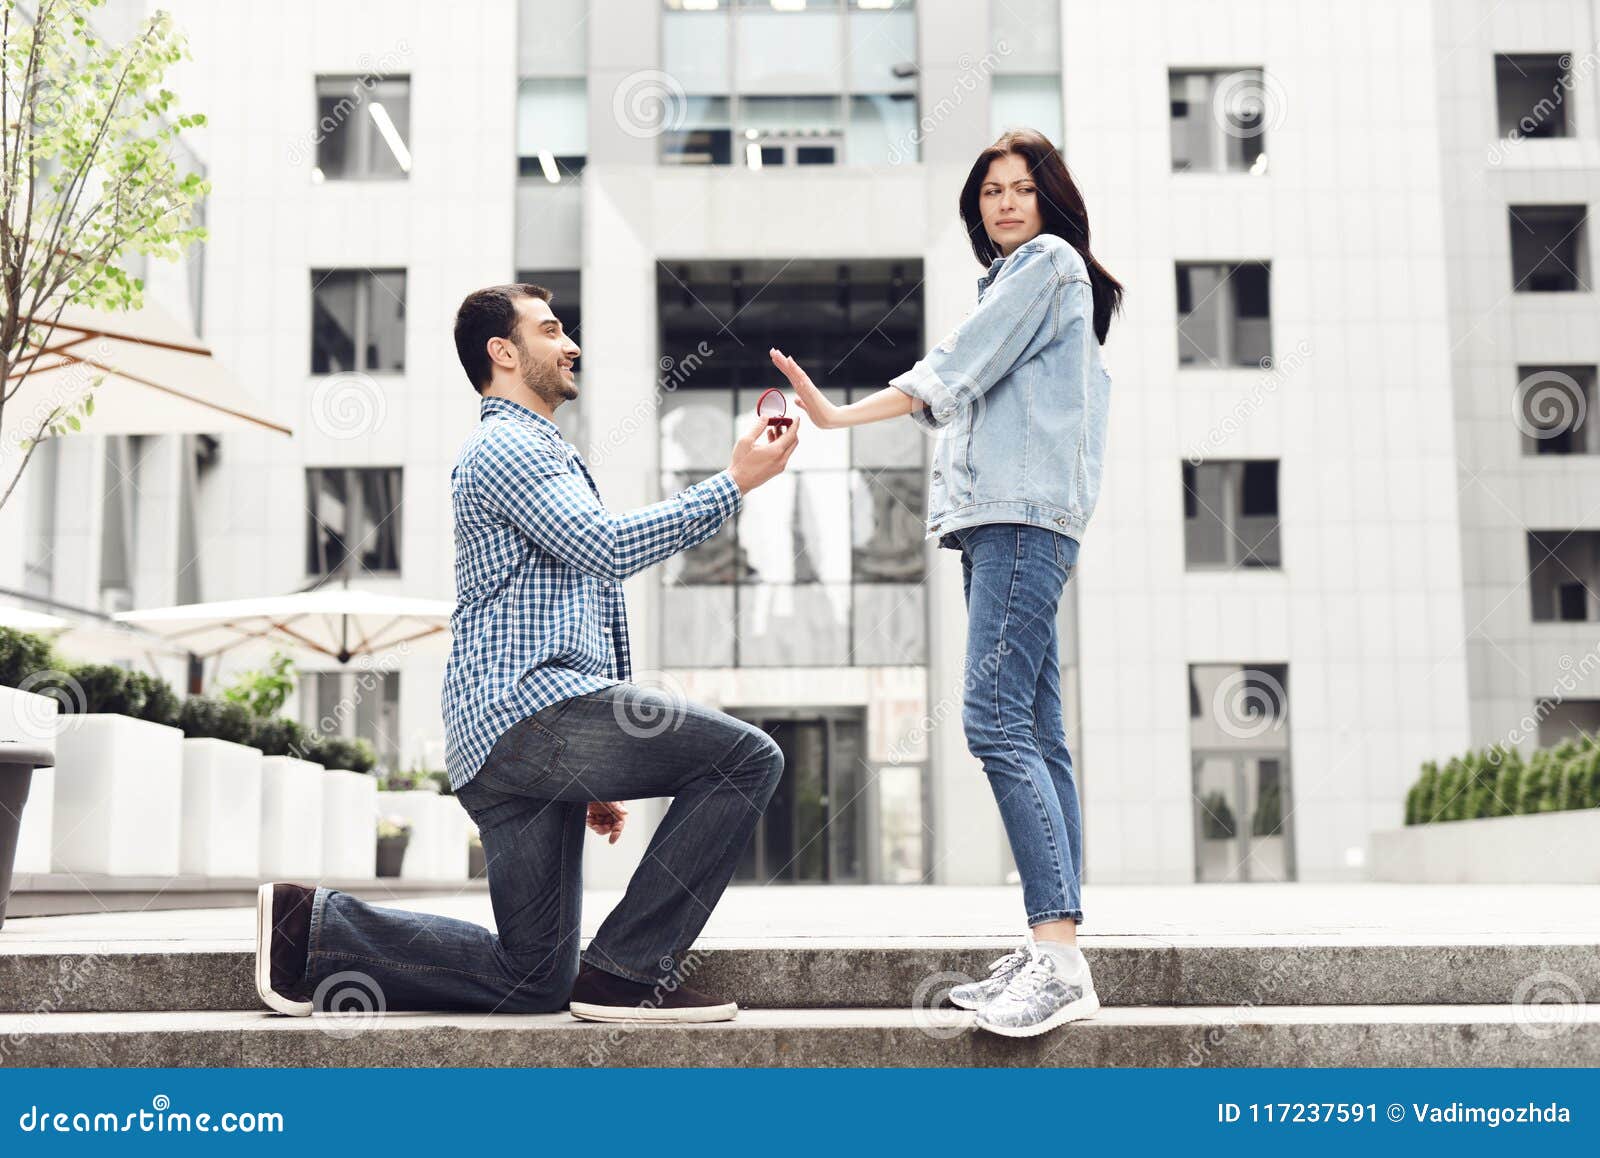 The Girl Refuses the Boy in the Marriage Proposal. Stock Image ...